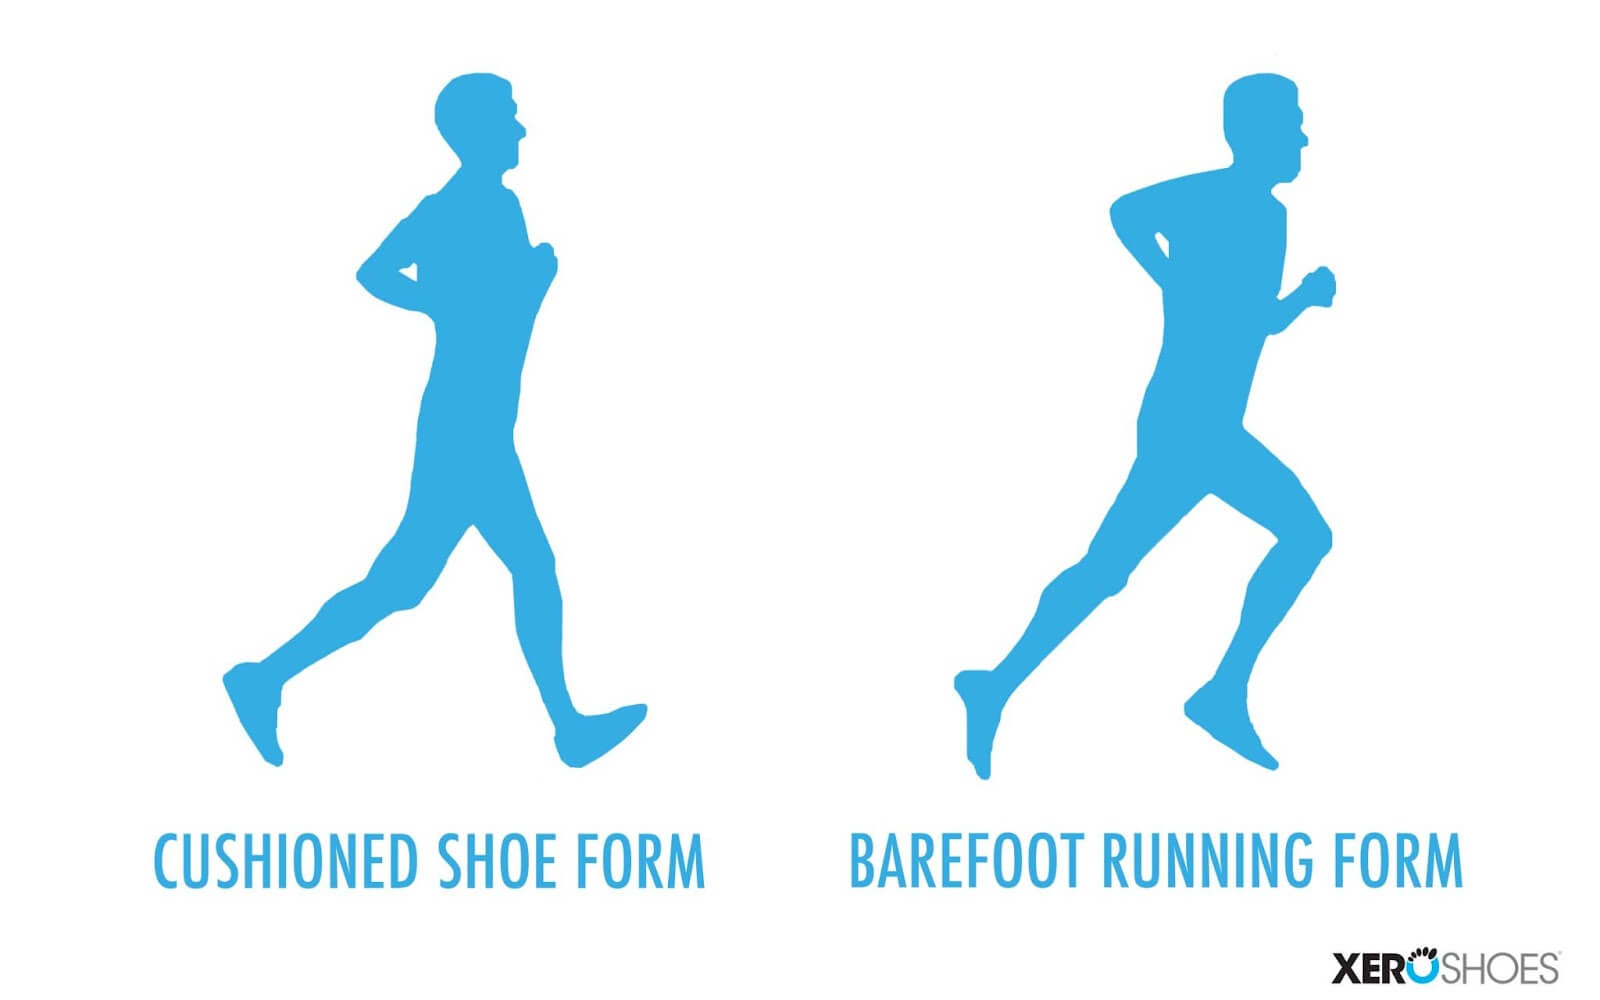 Tempted to try barefoot running? Here's what you need to know